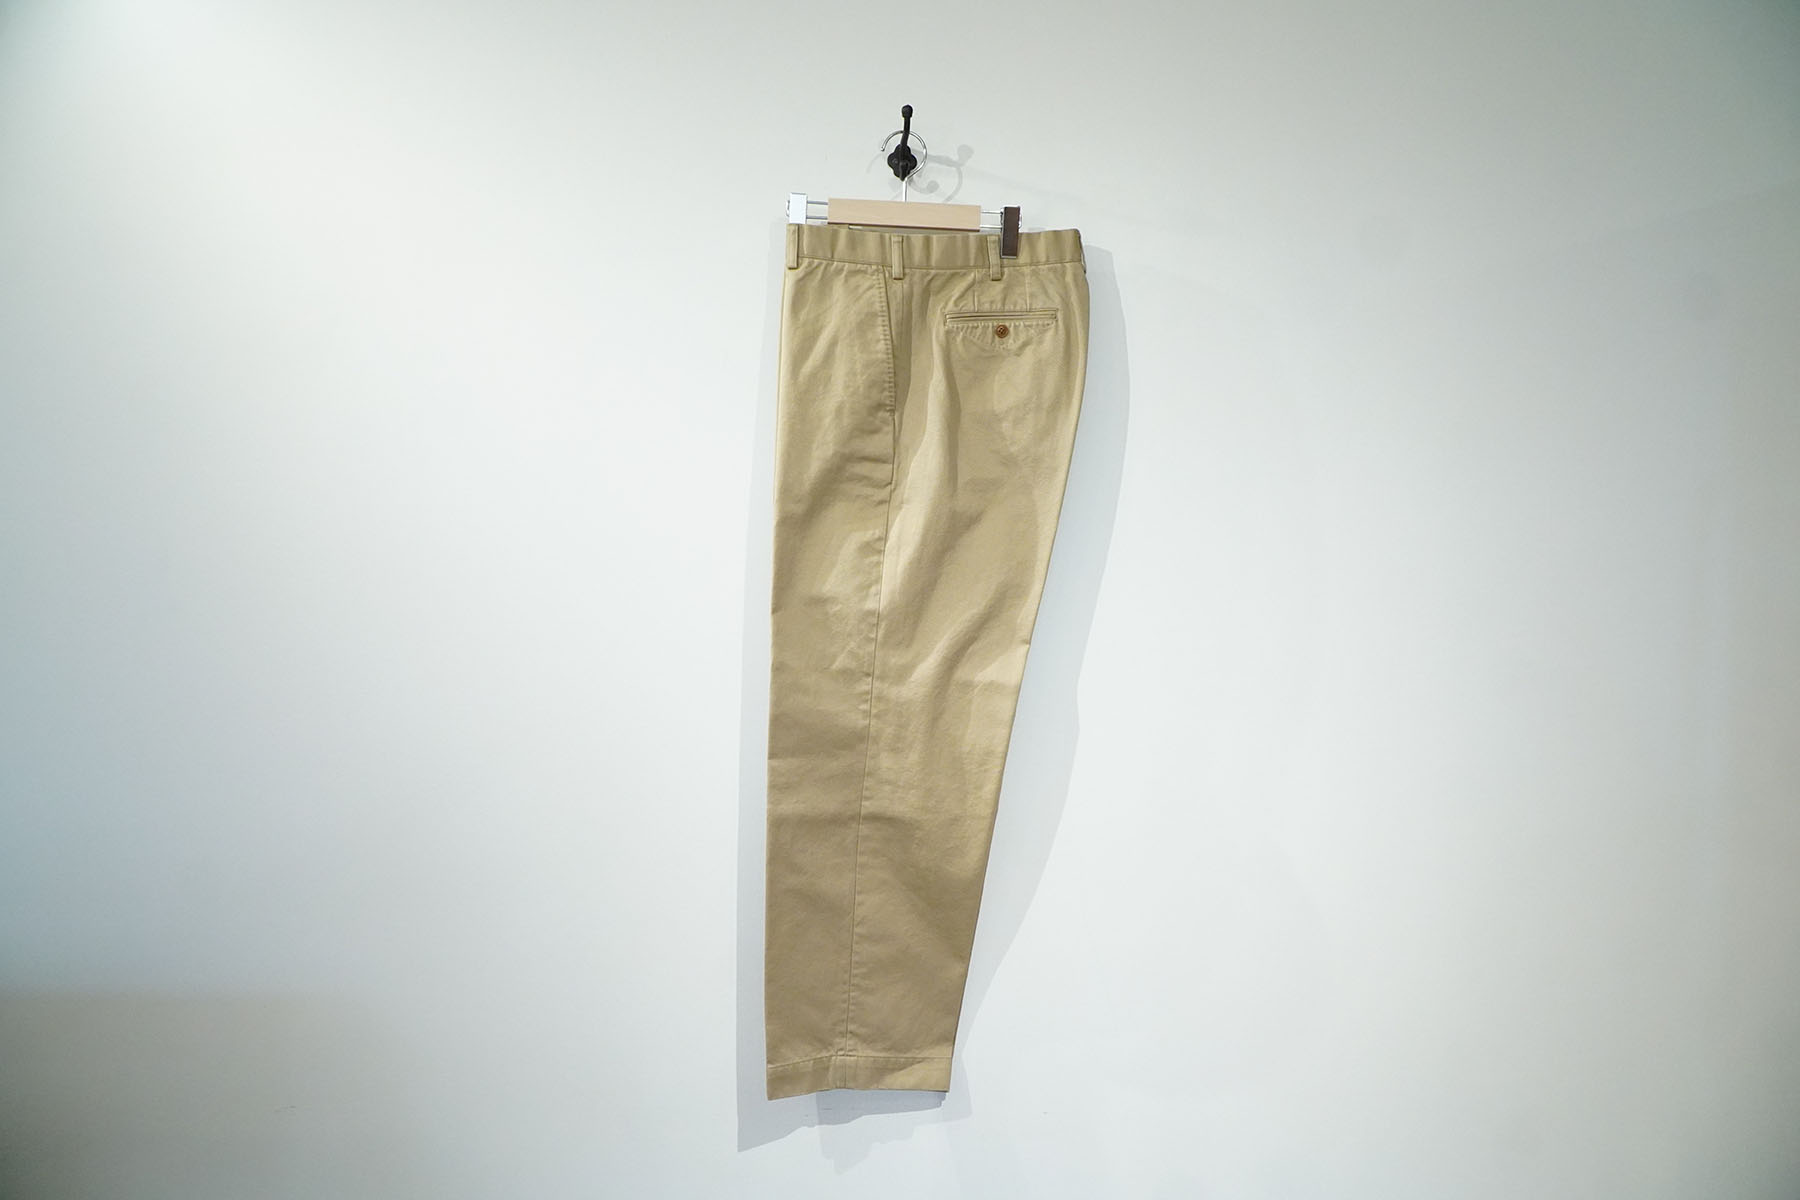 DCWHITE "WEST POINT OFFICER PANT" side